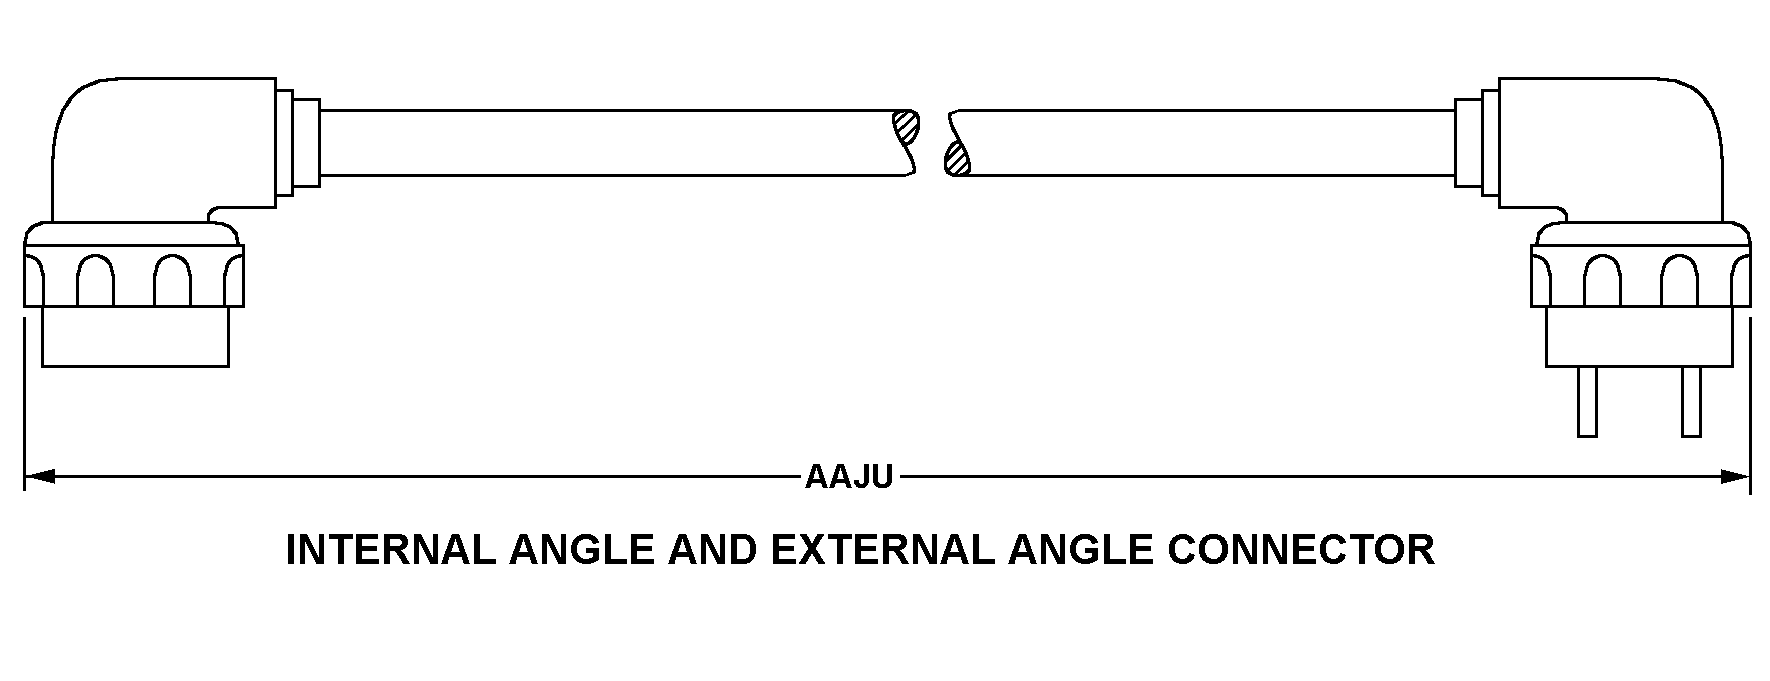 INTERNAL ANGLE AND EXTERNAL ANGLE CONNECTOR style nsn 5995-01-074-2189